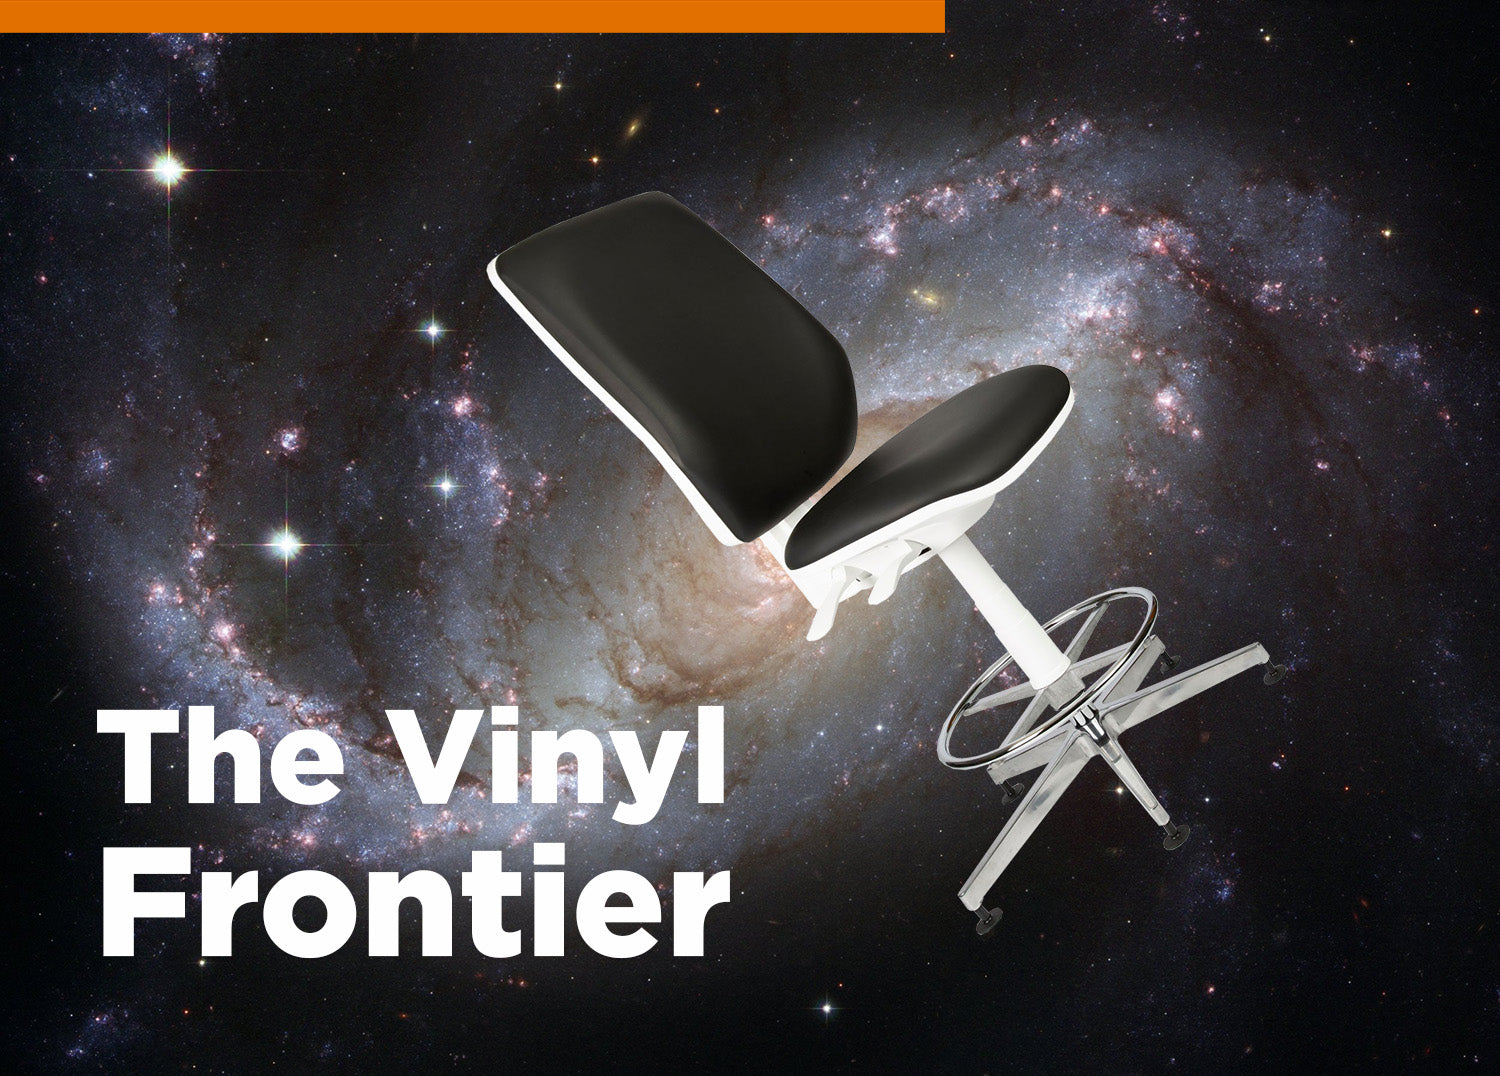 The vinyl frontier: Boldly sitting where no seat has sat before